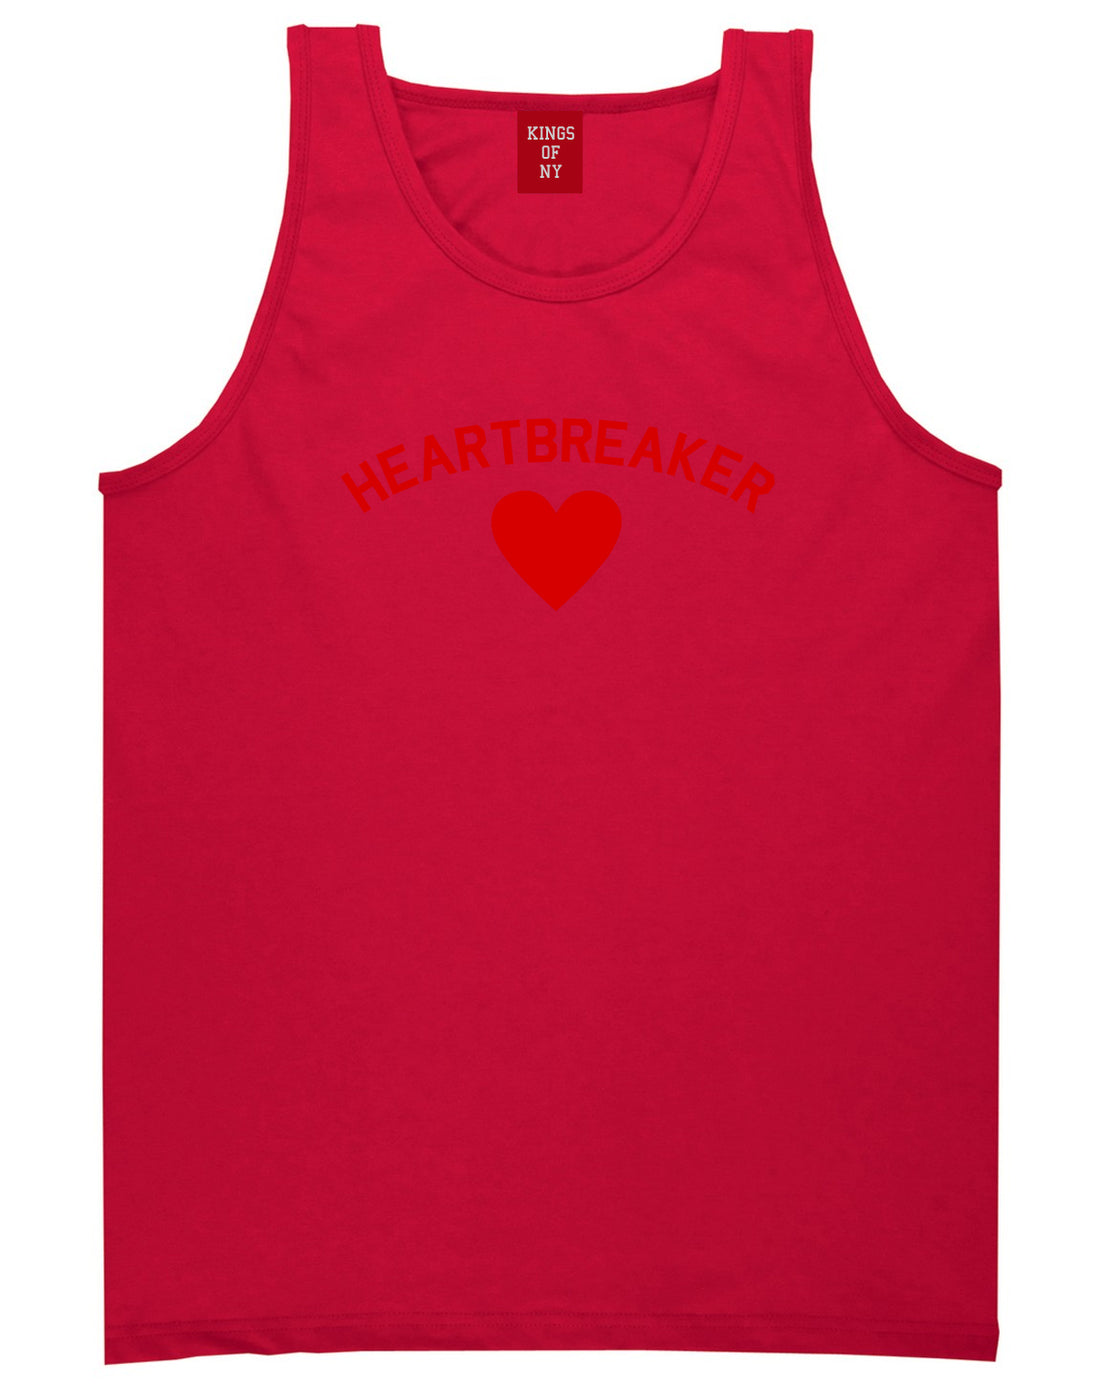 Heartbreaker Valentines Day Mens Tank Top Shirt Red